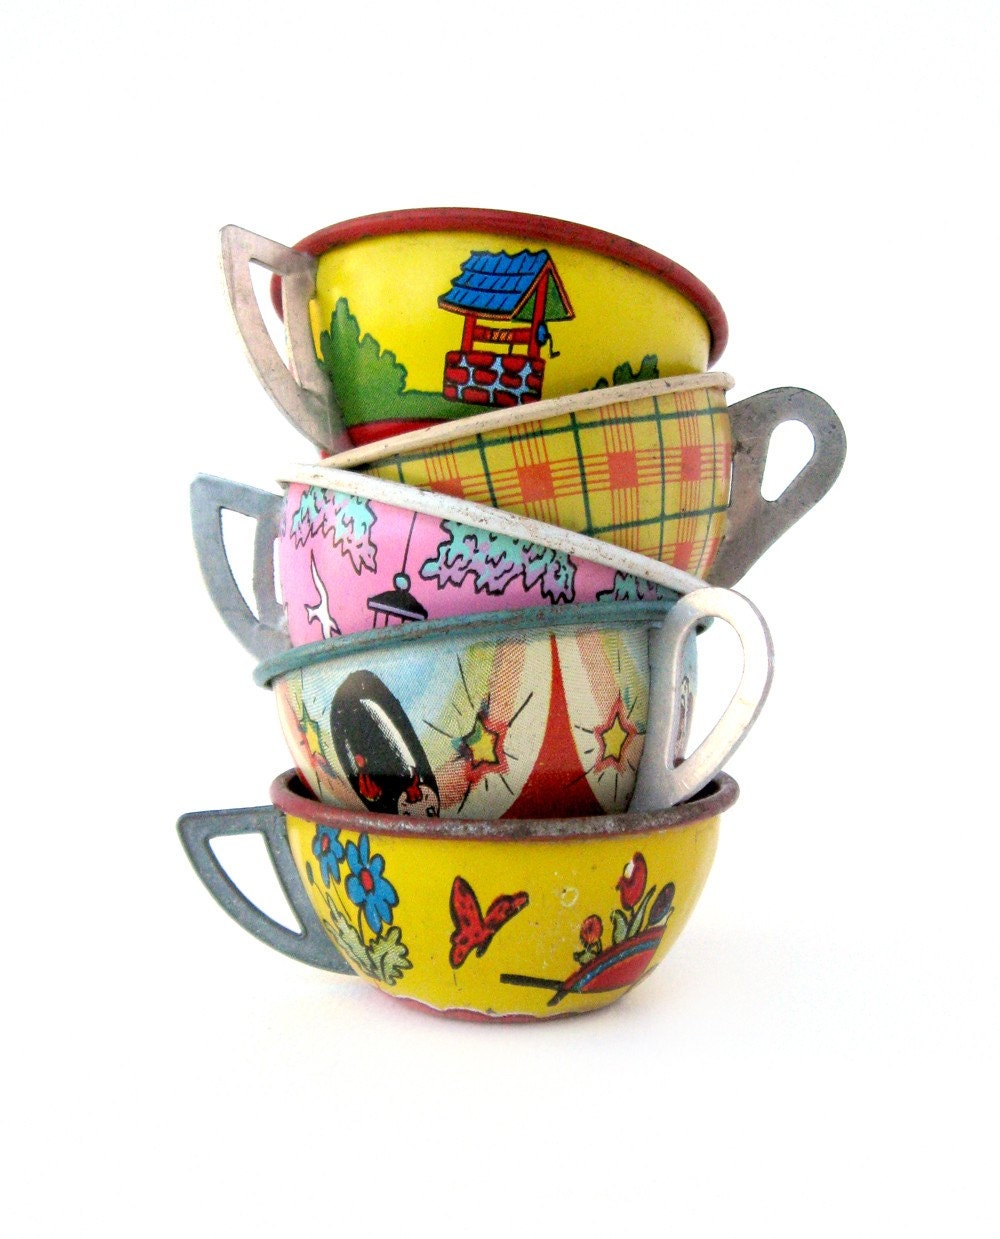 An Instant COLLECTION of TIN TEACUPS - Set of 5